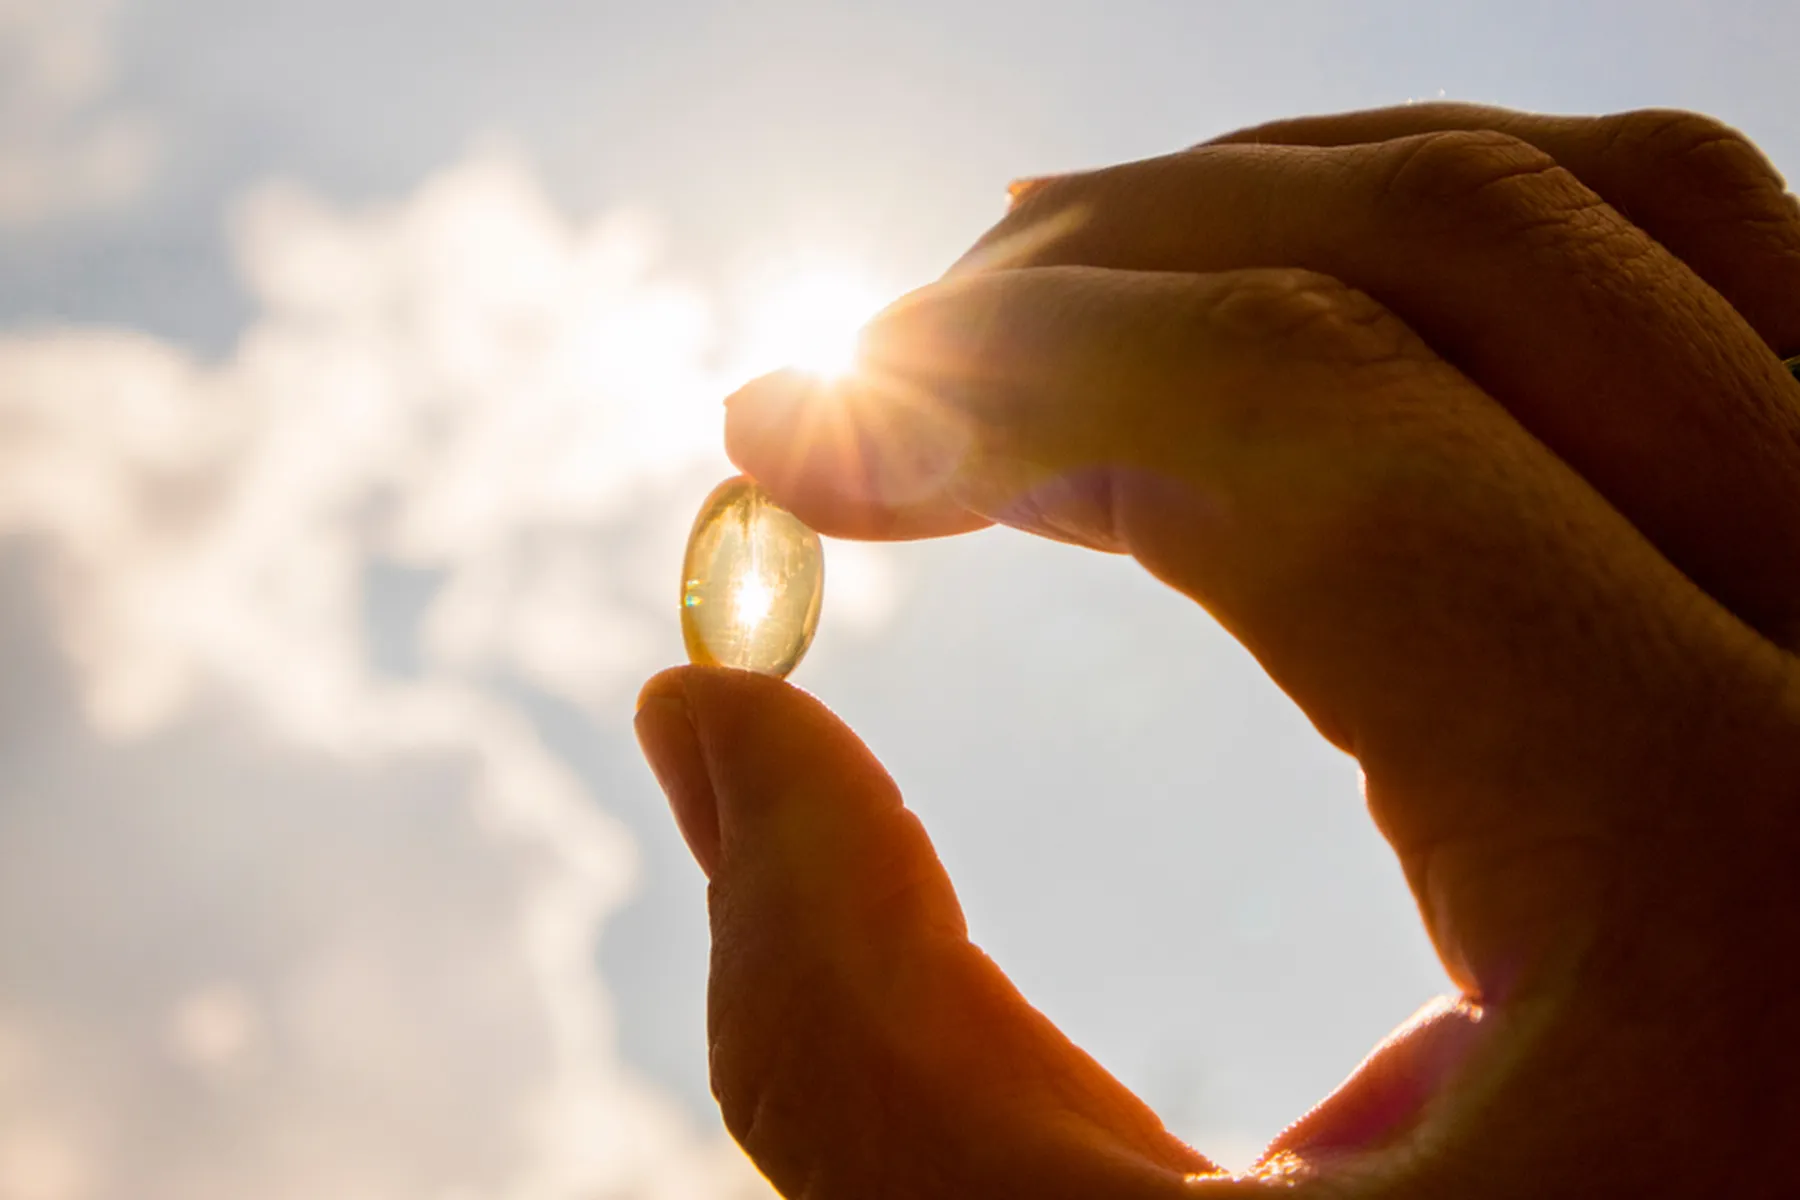 A vitamin d supplement capsule is held up to the sky, with sunlight shining through it.